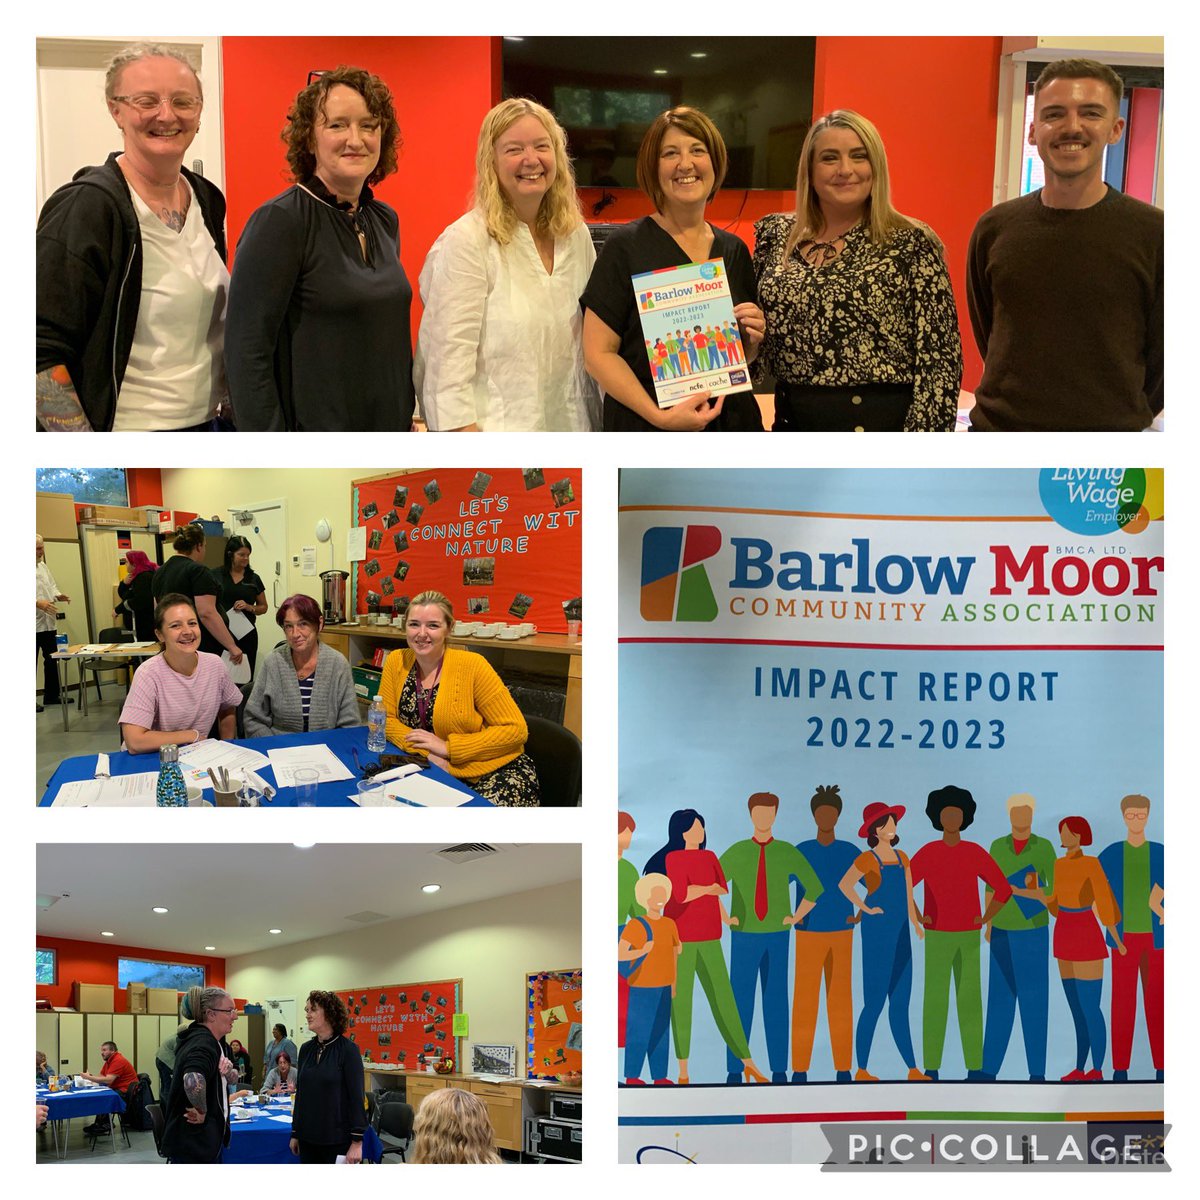 Pleasure to chair @BMCALtd AGM today & present Impact Report. Another phenomenal year of events, activities, learning opportunities, benefit advice, youth & play sessions & much more. Thank you to amazing staff & volunteers who work so hard to make BMCA such a special place ❤️